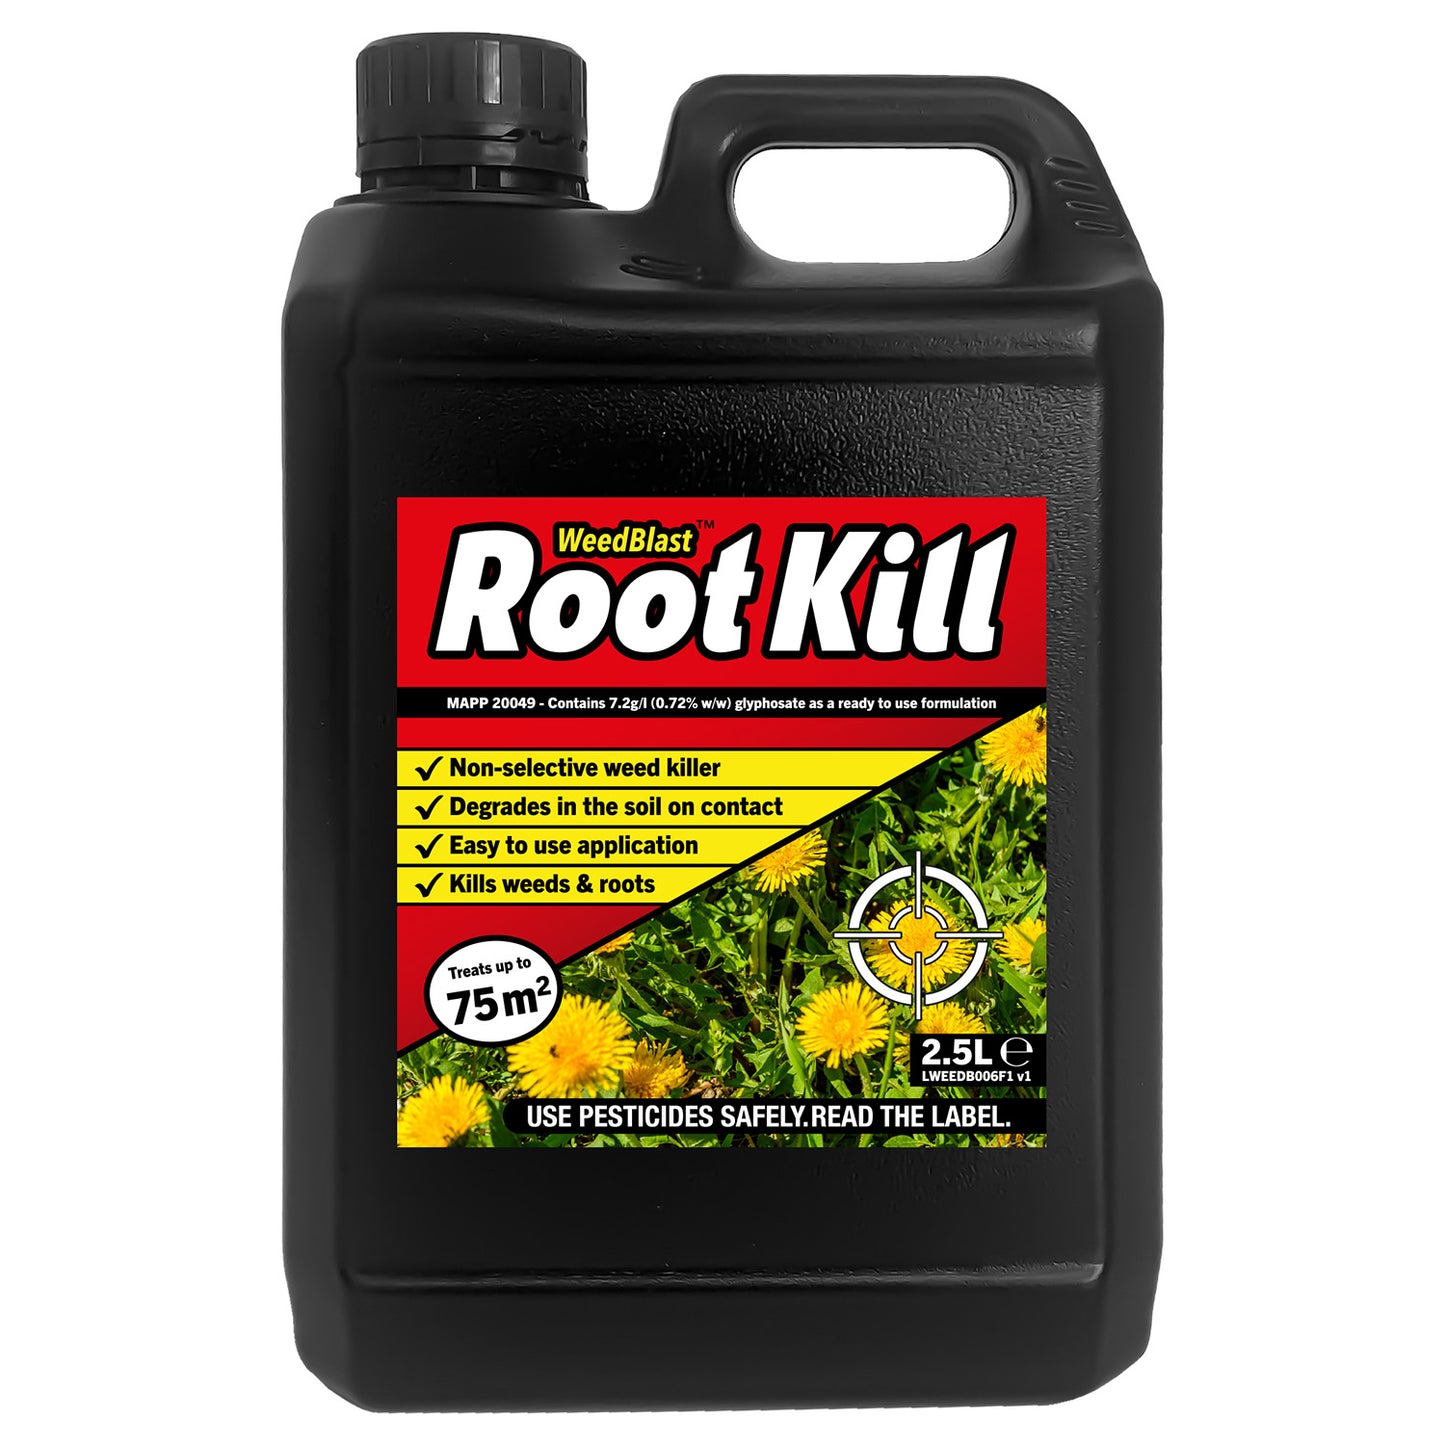 WeedBlast RootKill 2 x 2.5 Litre Ready to Use Glyphosate Weedkiller with Long Hose Trigger